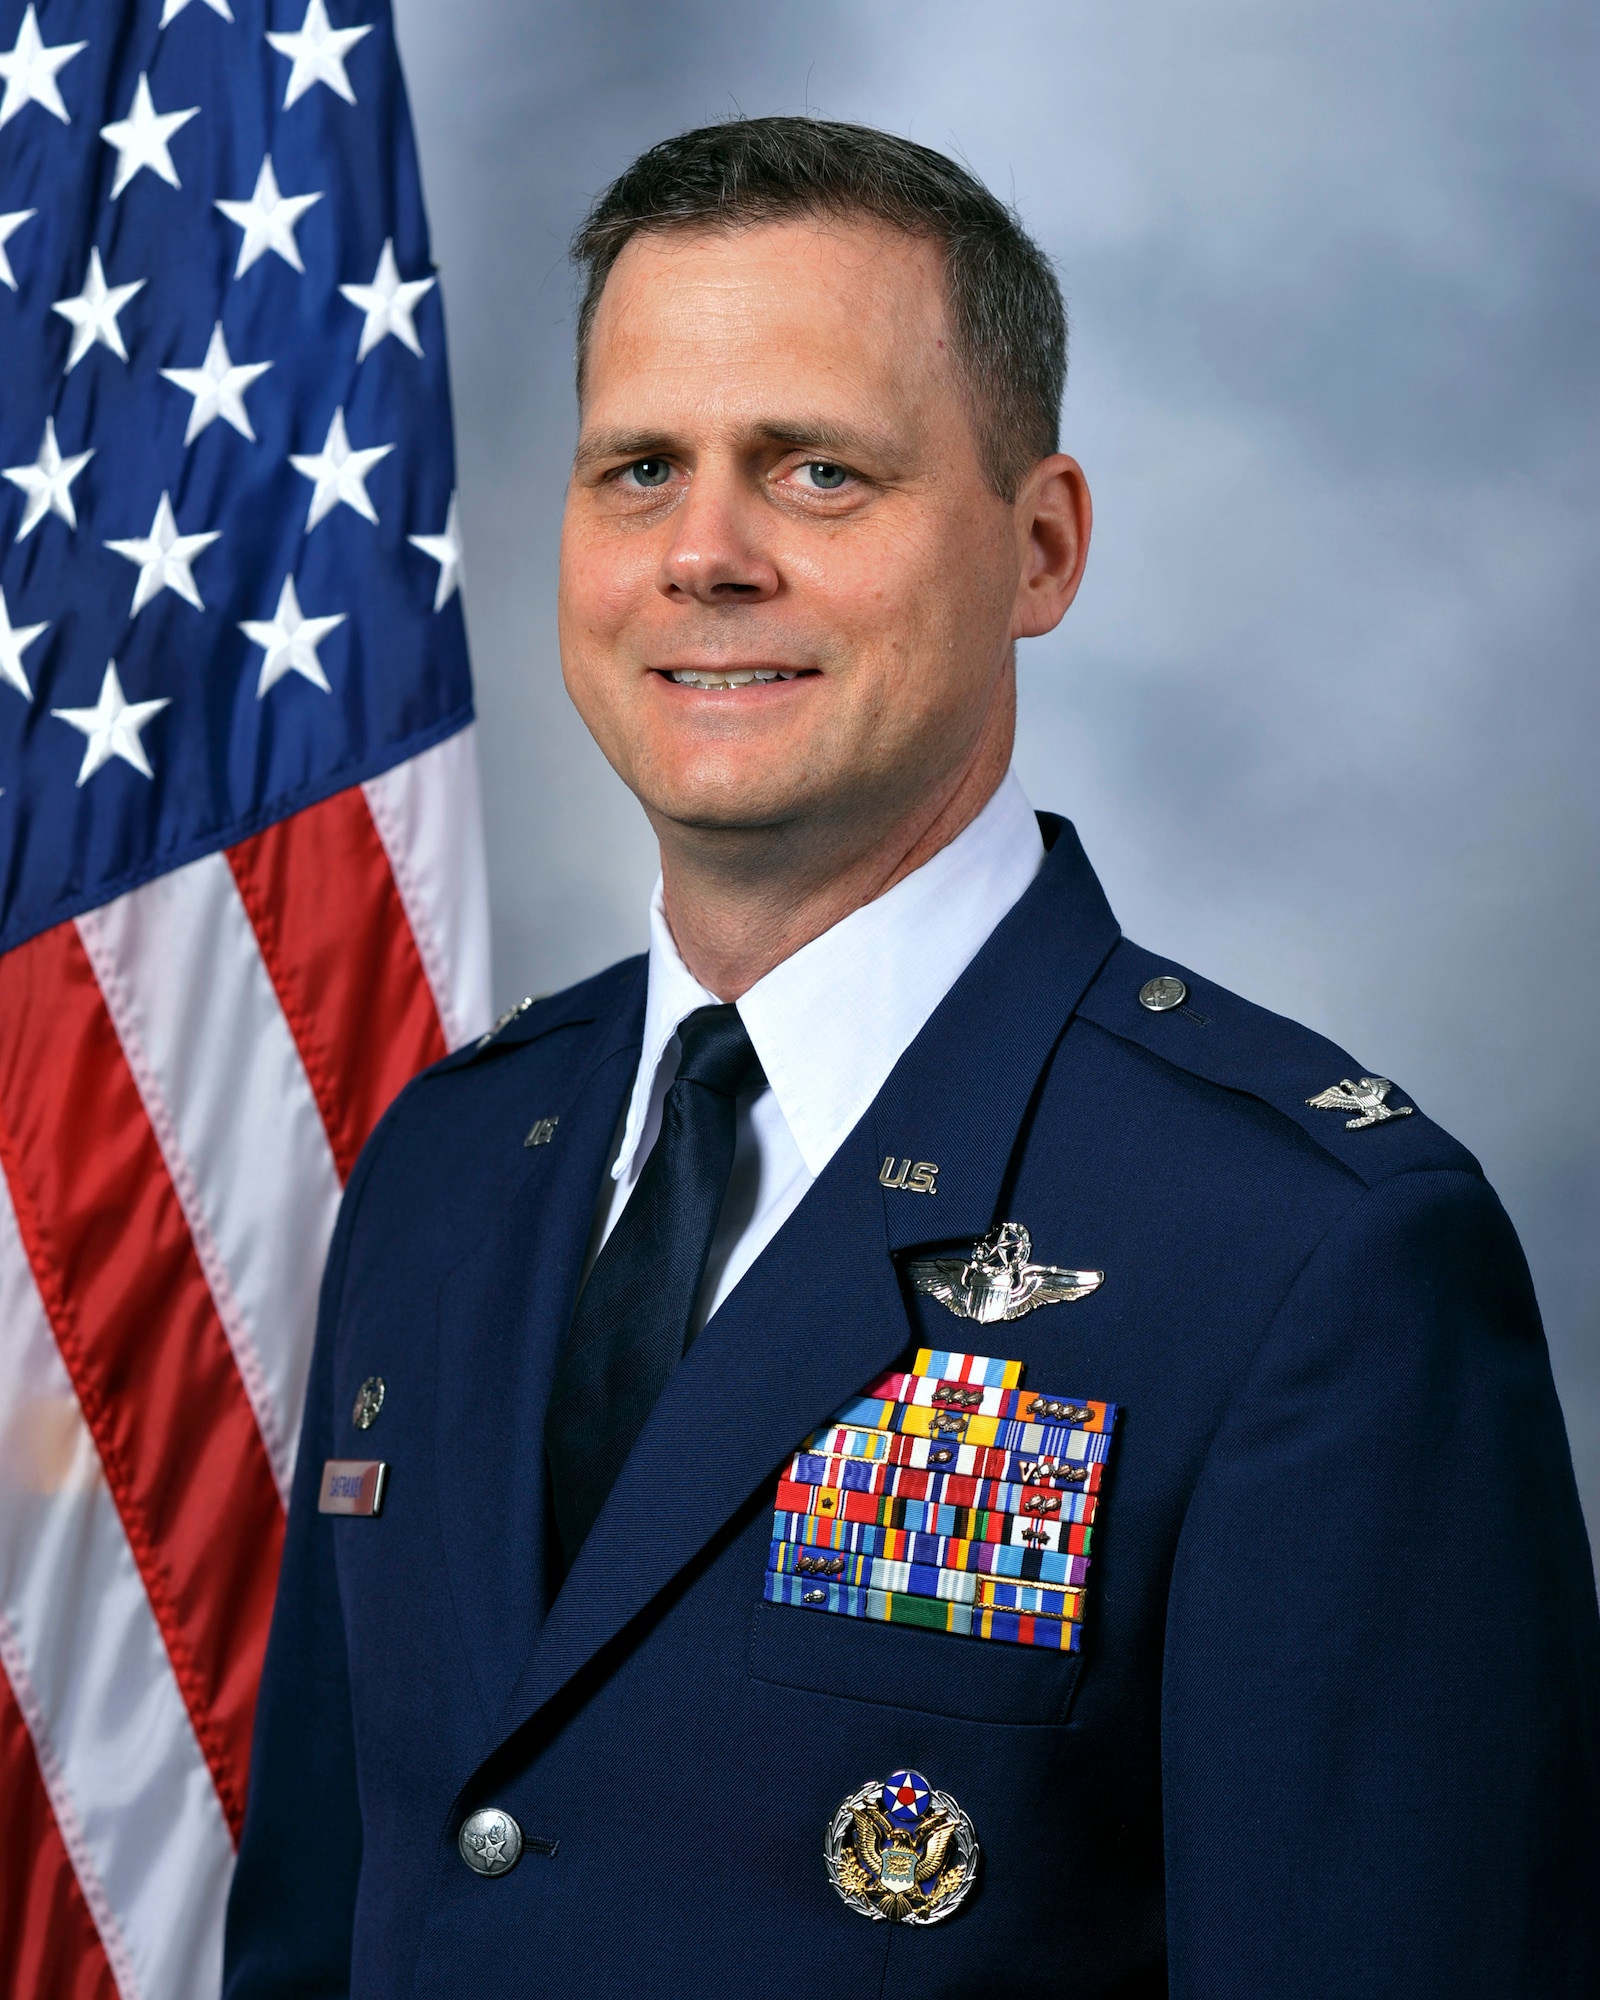 Colonel Joel W. Safranek is the Commander, 436th Airlift Wing, Dover Air Force Base, Delaware. As commander, he is responsible for a combined C-5 and C-17 wing providing worldwide movement of high-priority personnel and cargo. Dover AFB is home to Air Force Mortuary Affairs Operations, the Department of Defense’s largest aerial port and the Air Mobility Command Museum.